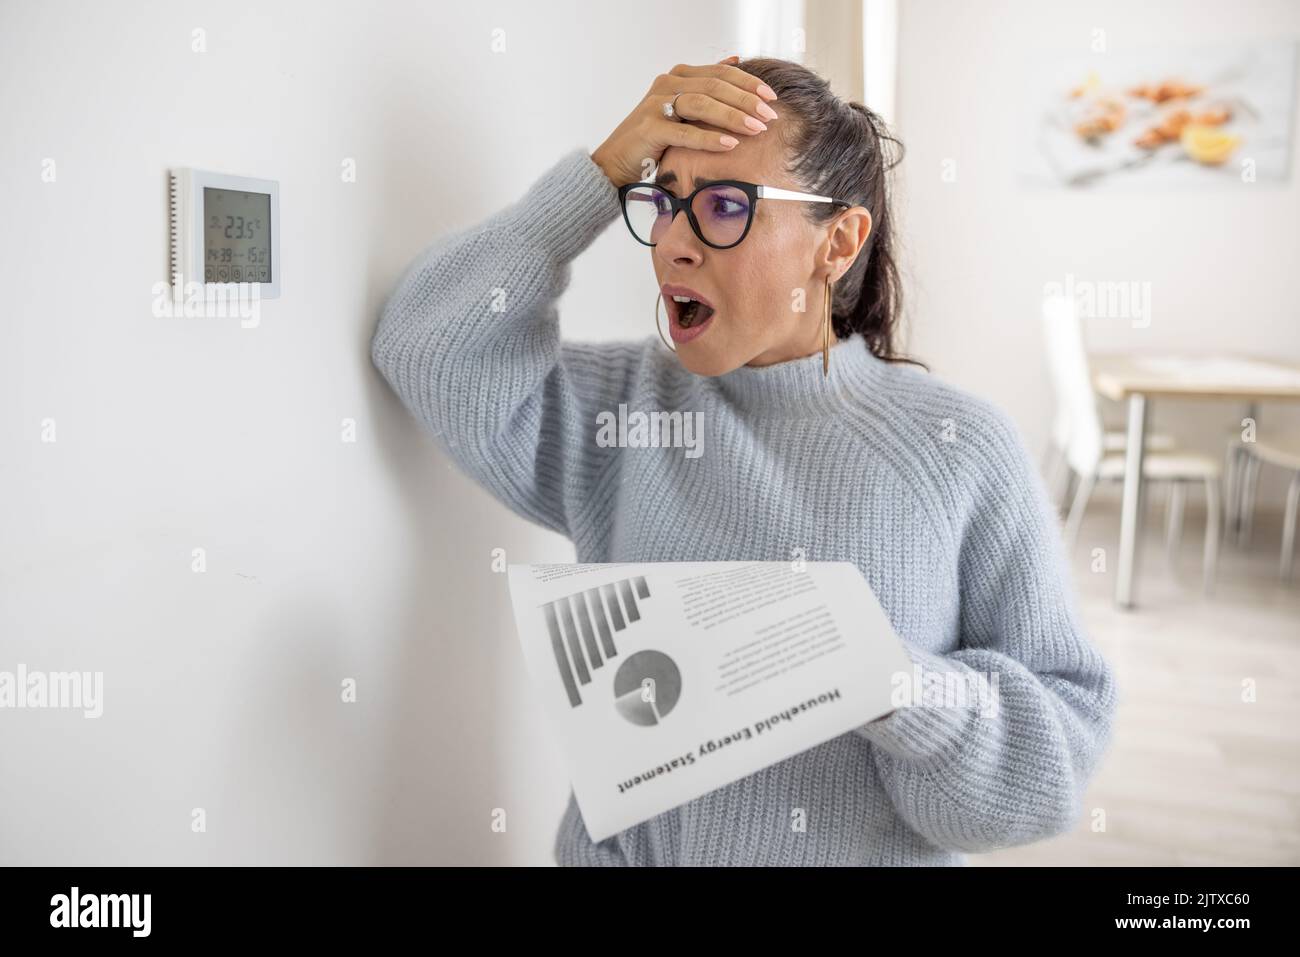 Woman cannot believe her own eyes the sum on her energy bill looking shocked at the thermostat on the wall next to her. Stock Photo